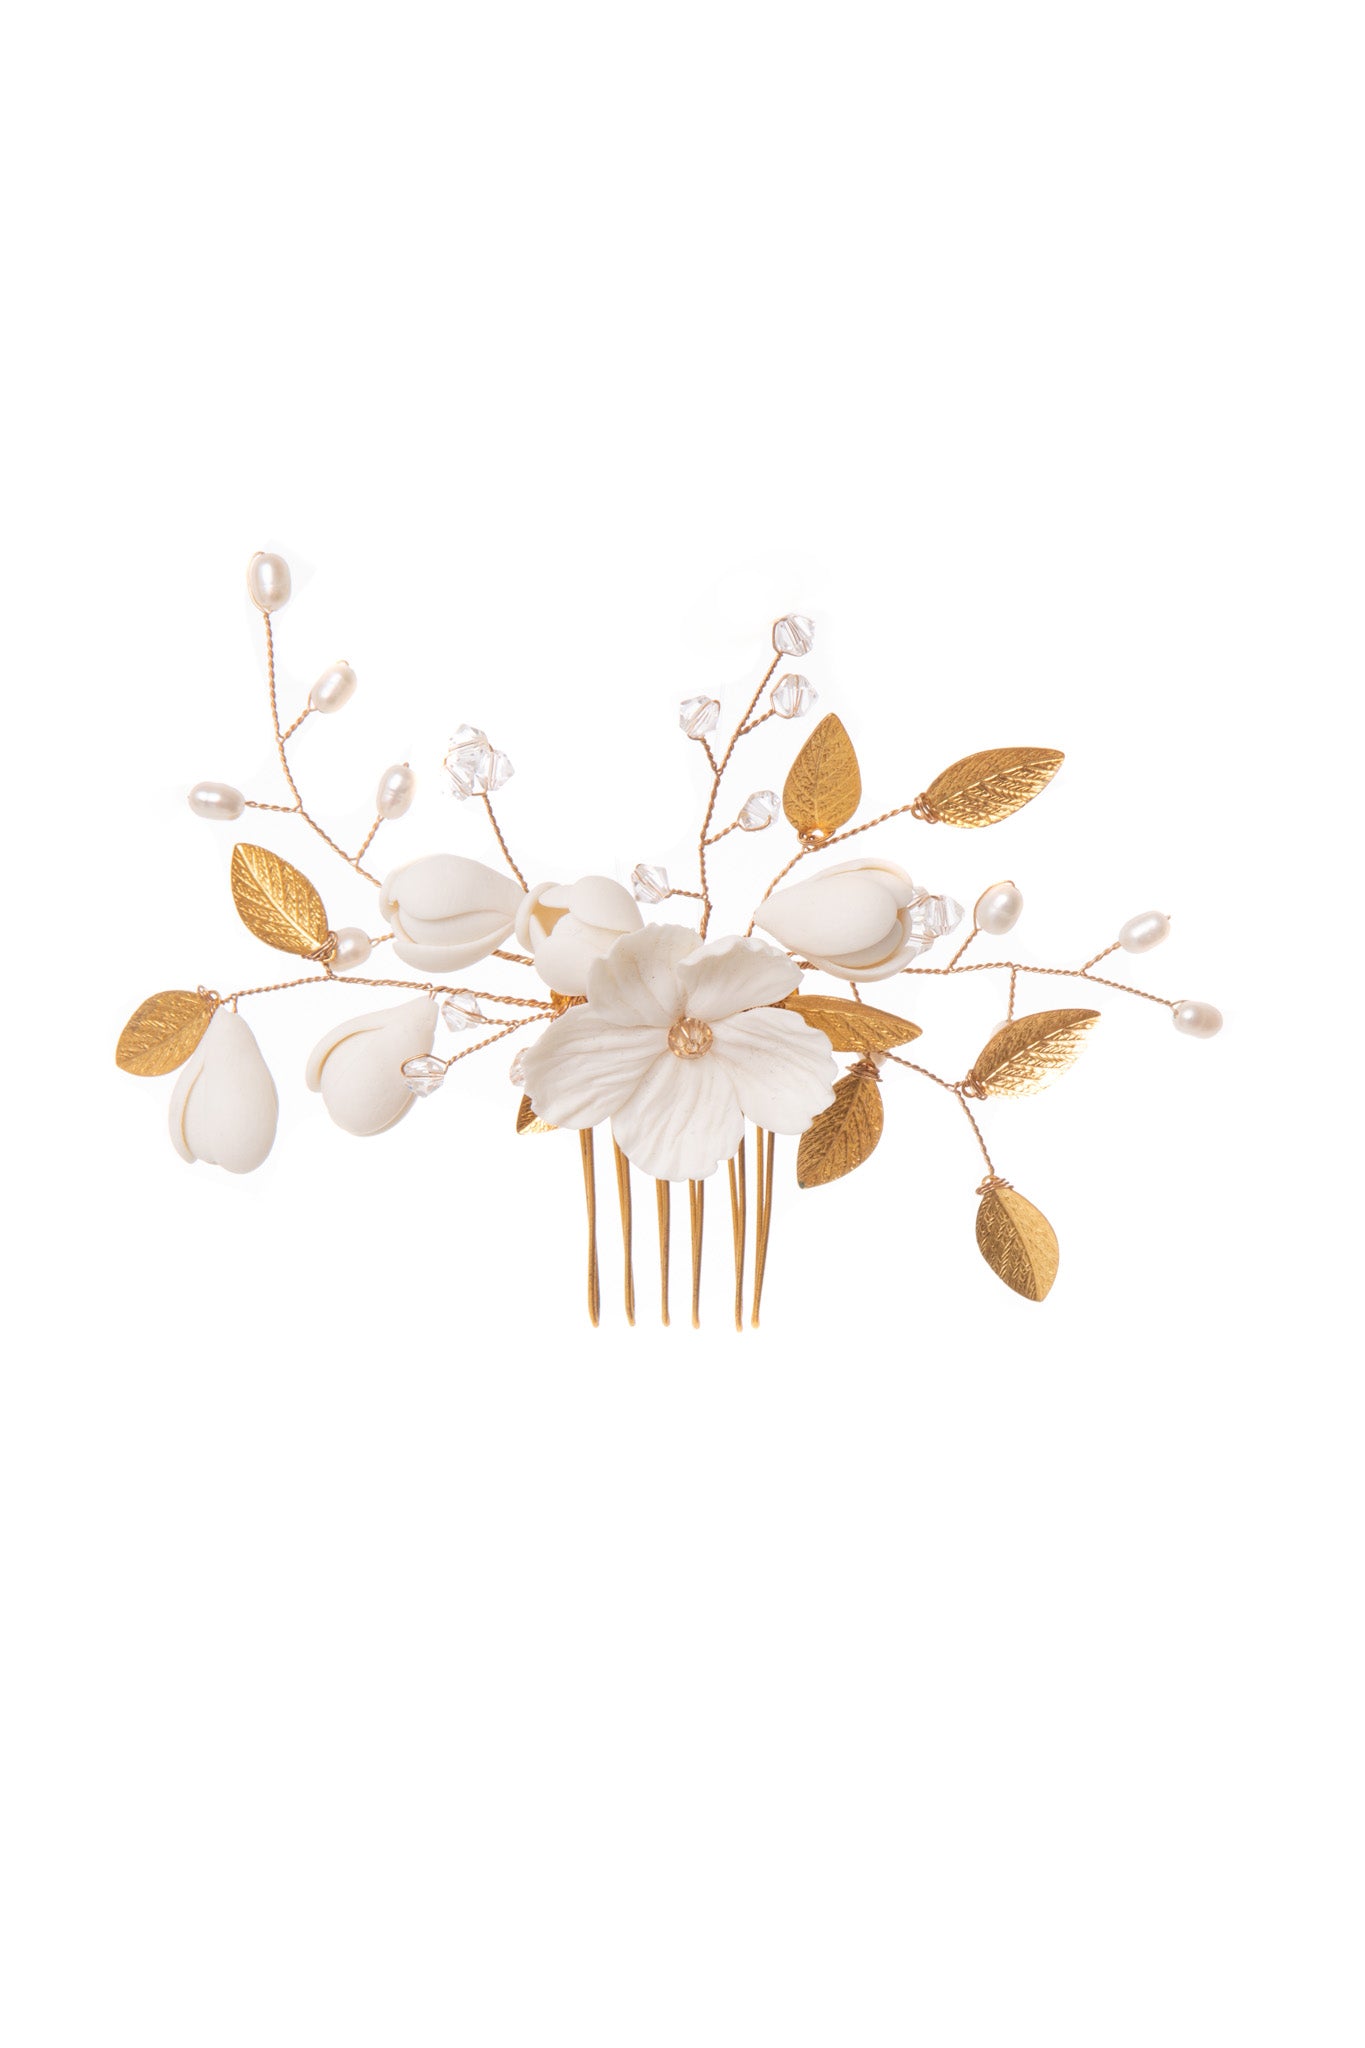 Blossom comb features an exquisite stem of blooms enveloped in a dreamy aura of gold leaves, glimmering crystals and delicate pearls